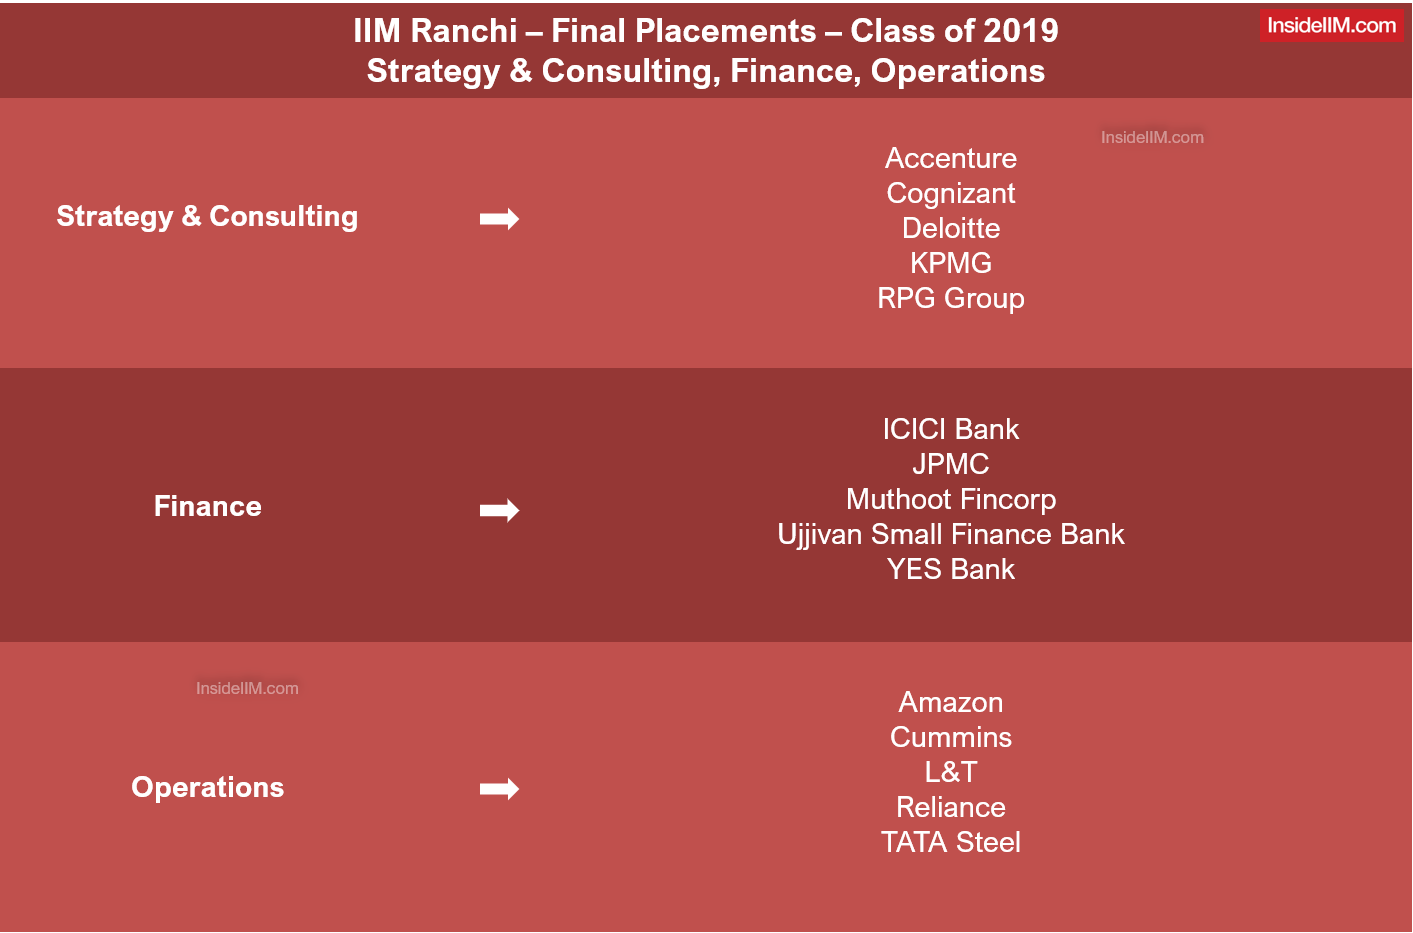 IIM Ranchi Final Placements 2019 - Top Strategy & Consulting, Finance, Operations Recruiters